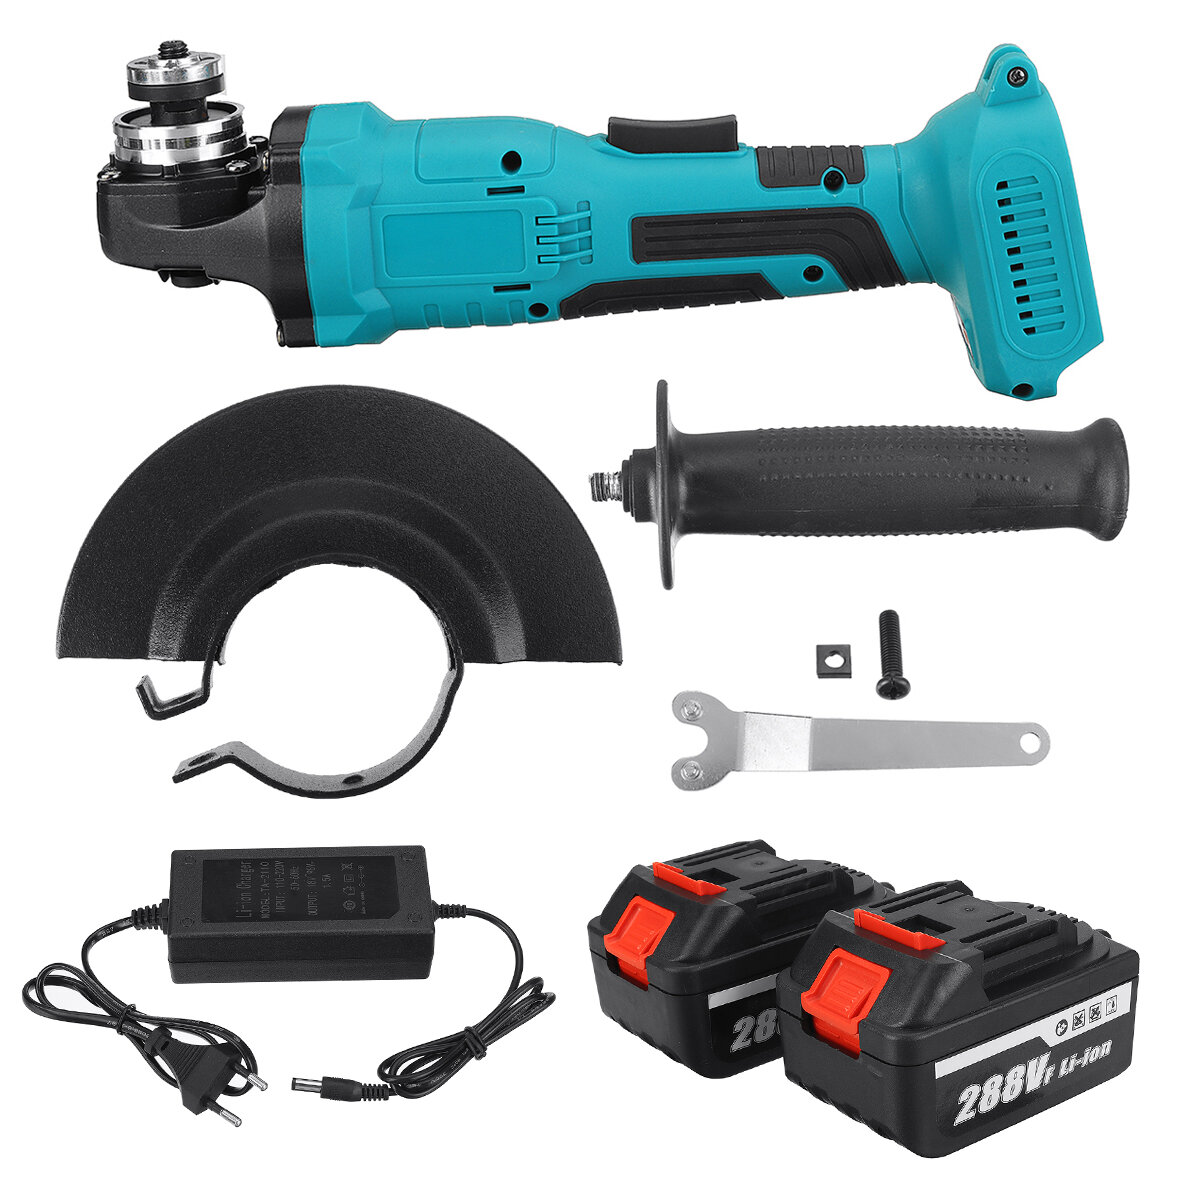 100125mm Brushless Cordless Angle Grinder Polisher Cutting Tool W None12 Battery For Makita